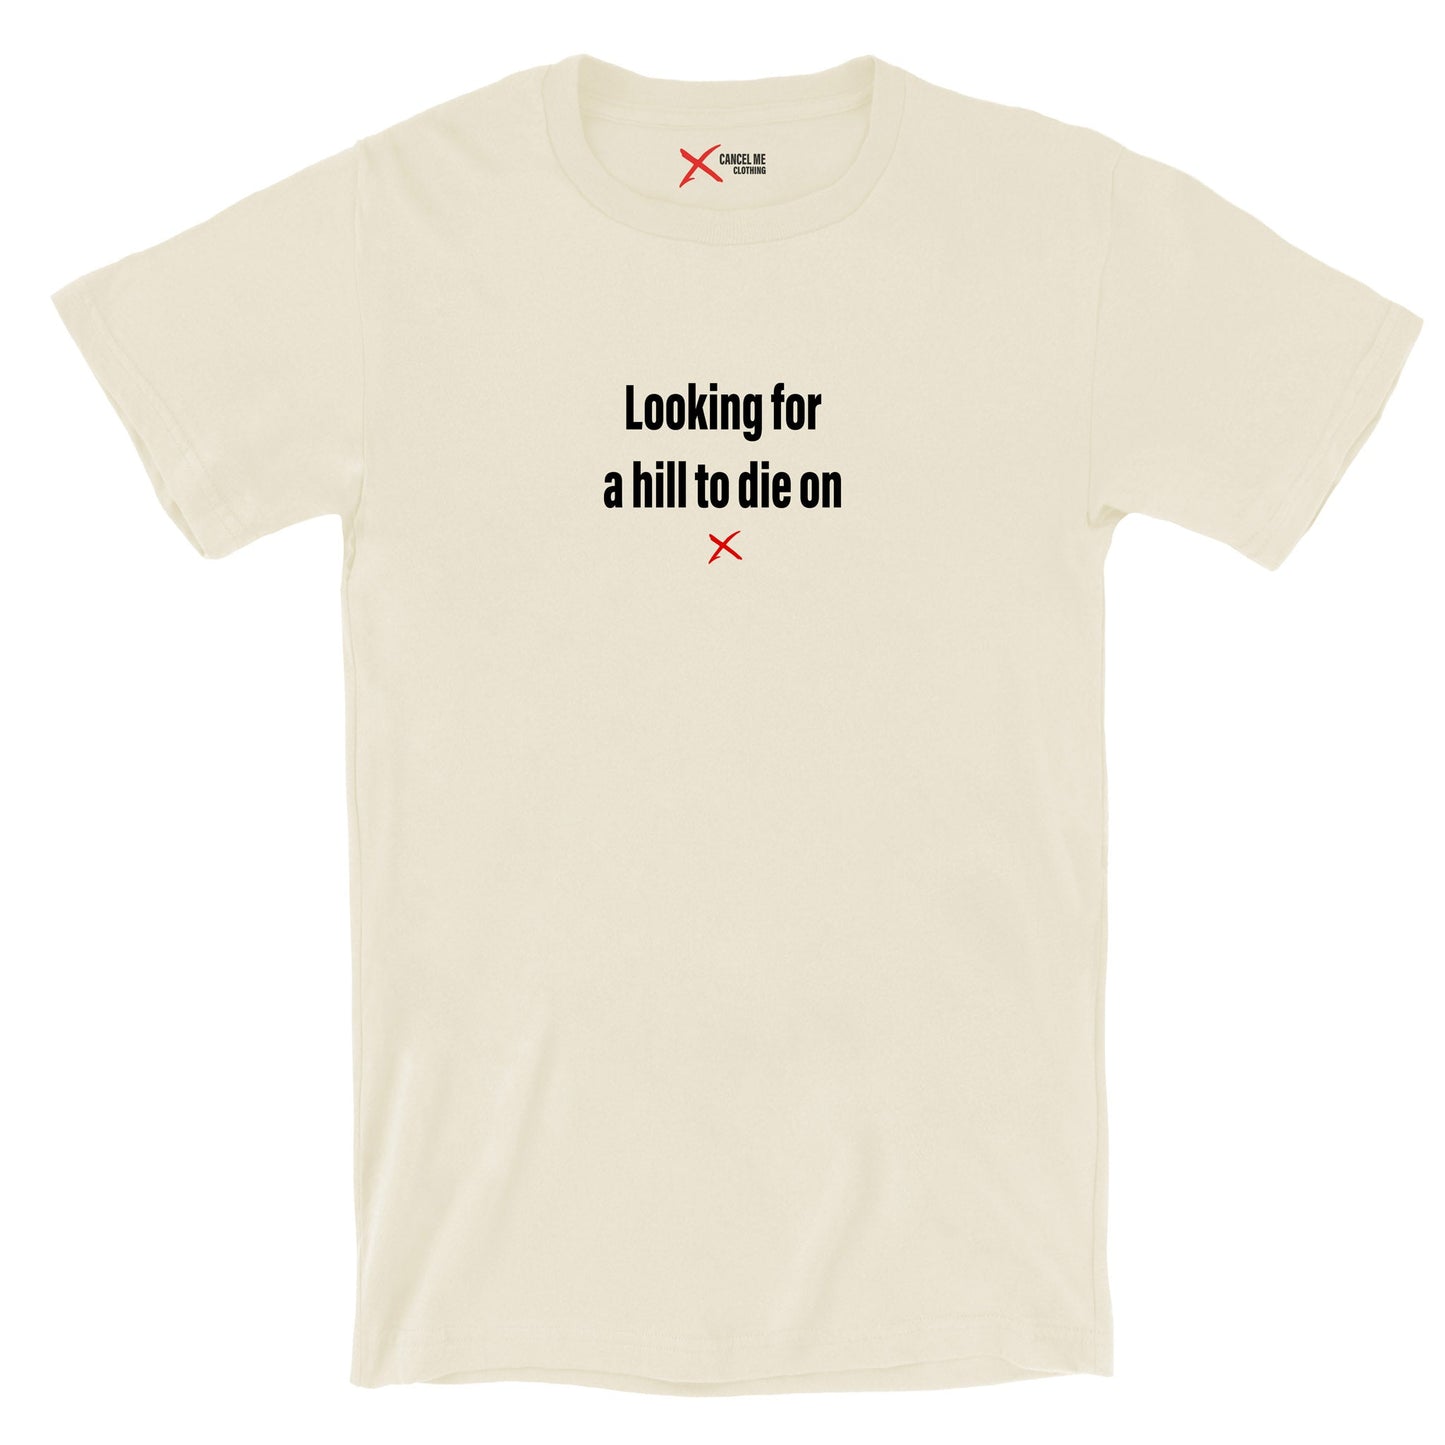 Looking for a hill to die on - Shirt